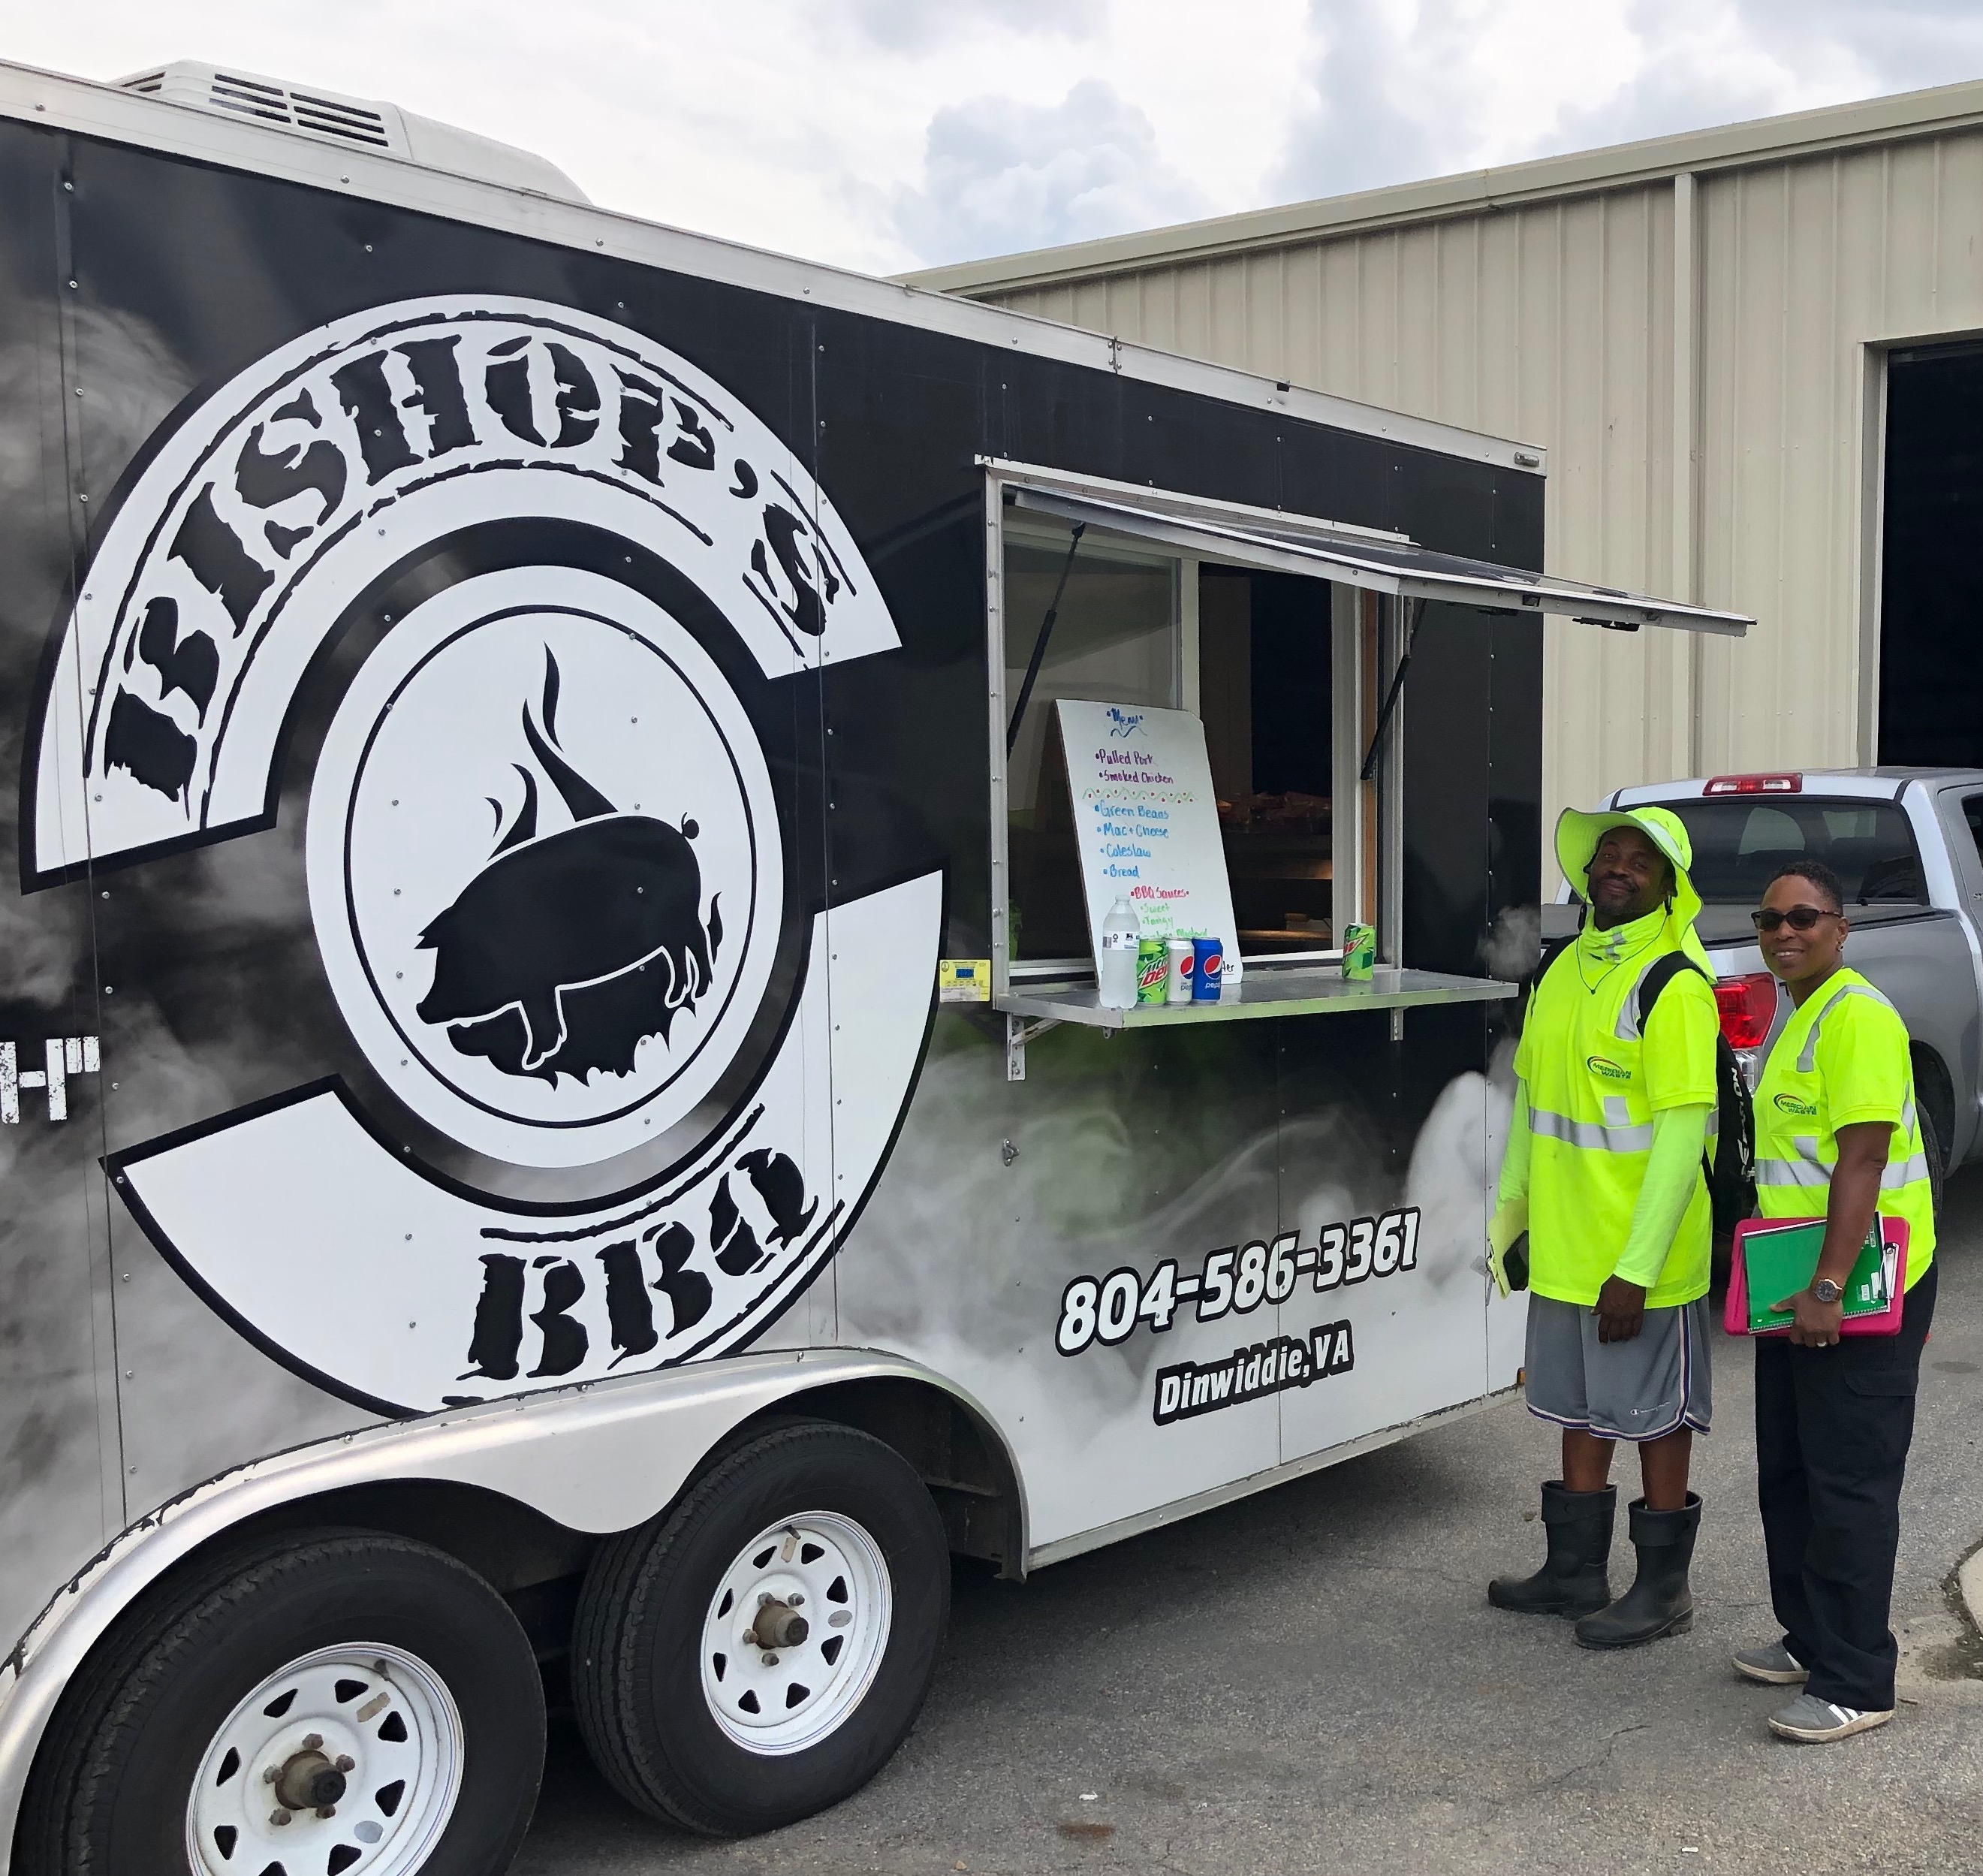 Petersburg Shows Employee Appreciation with BBQ!